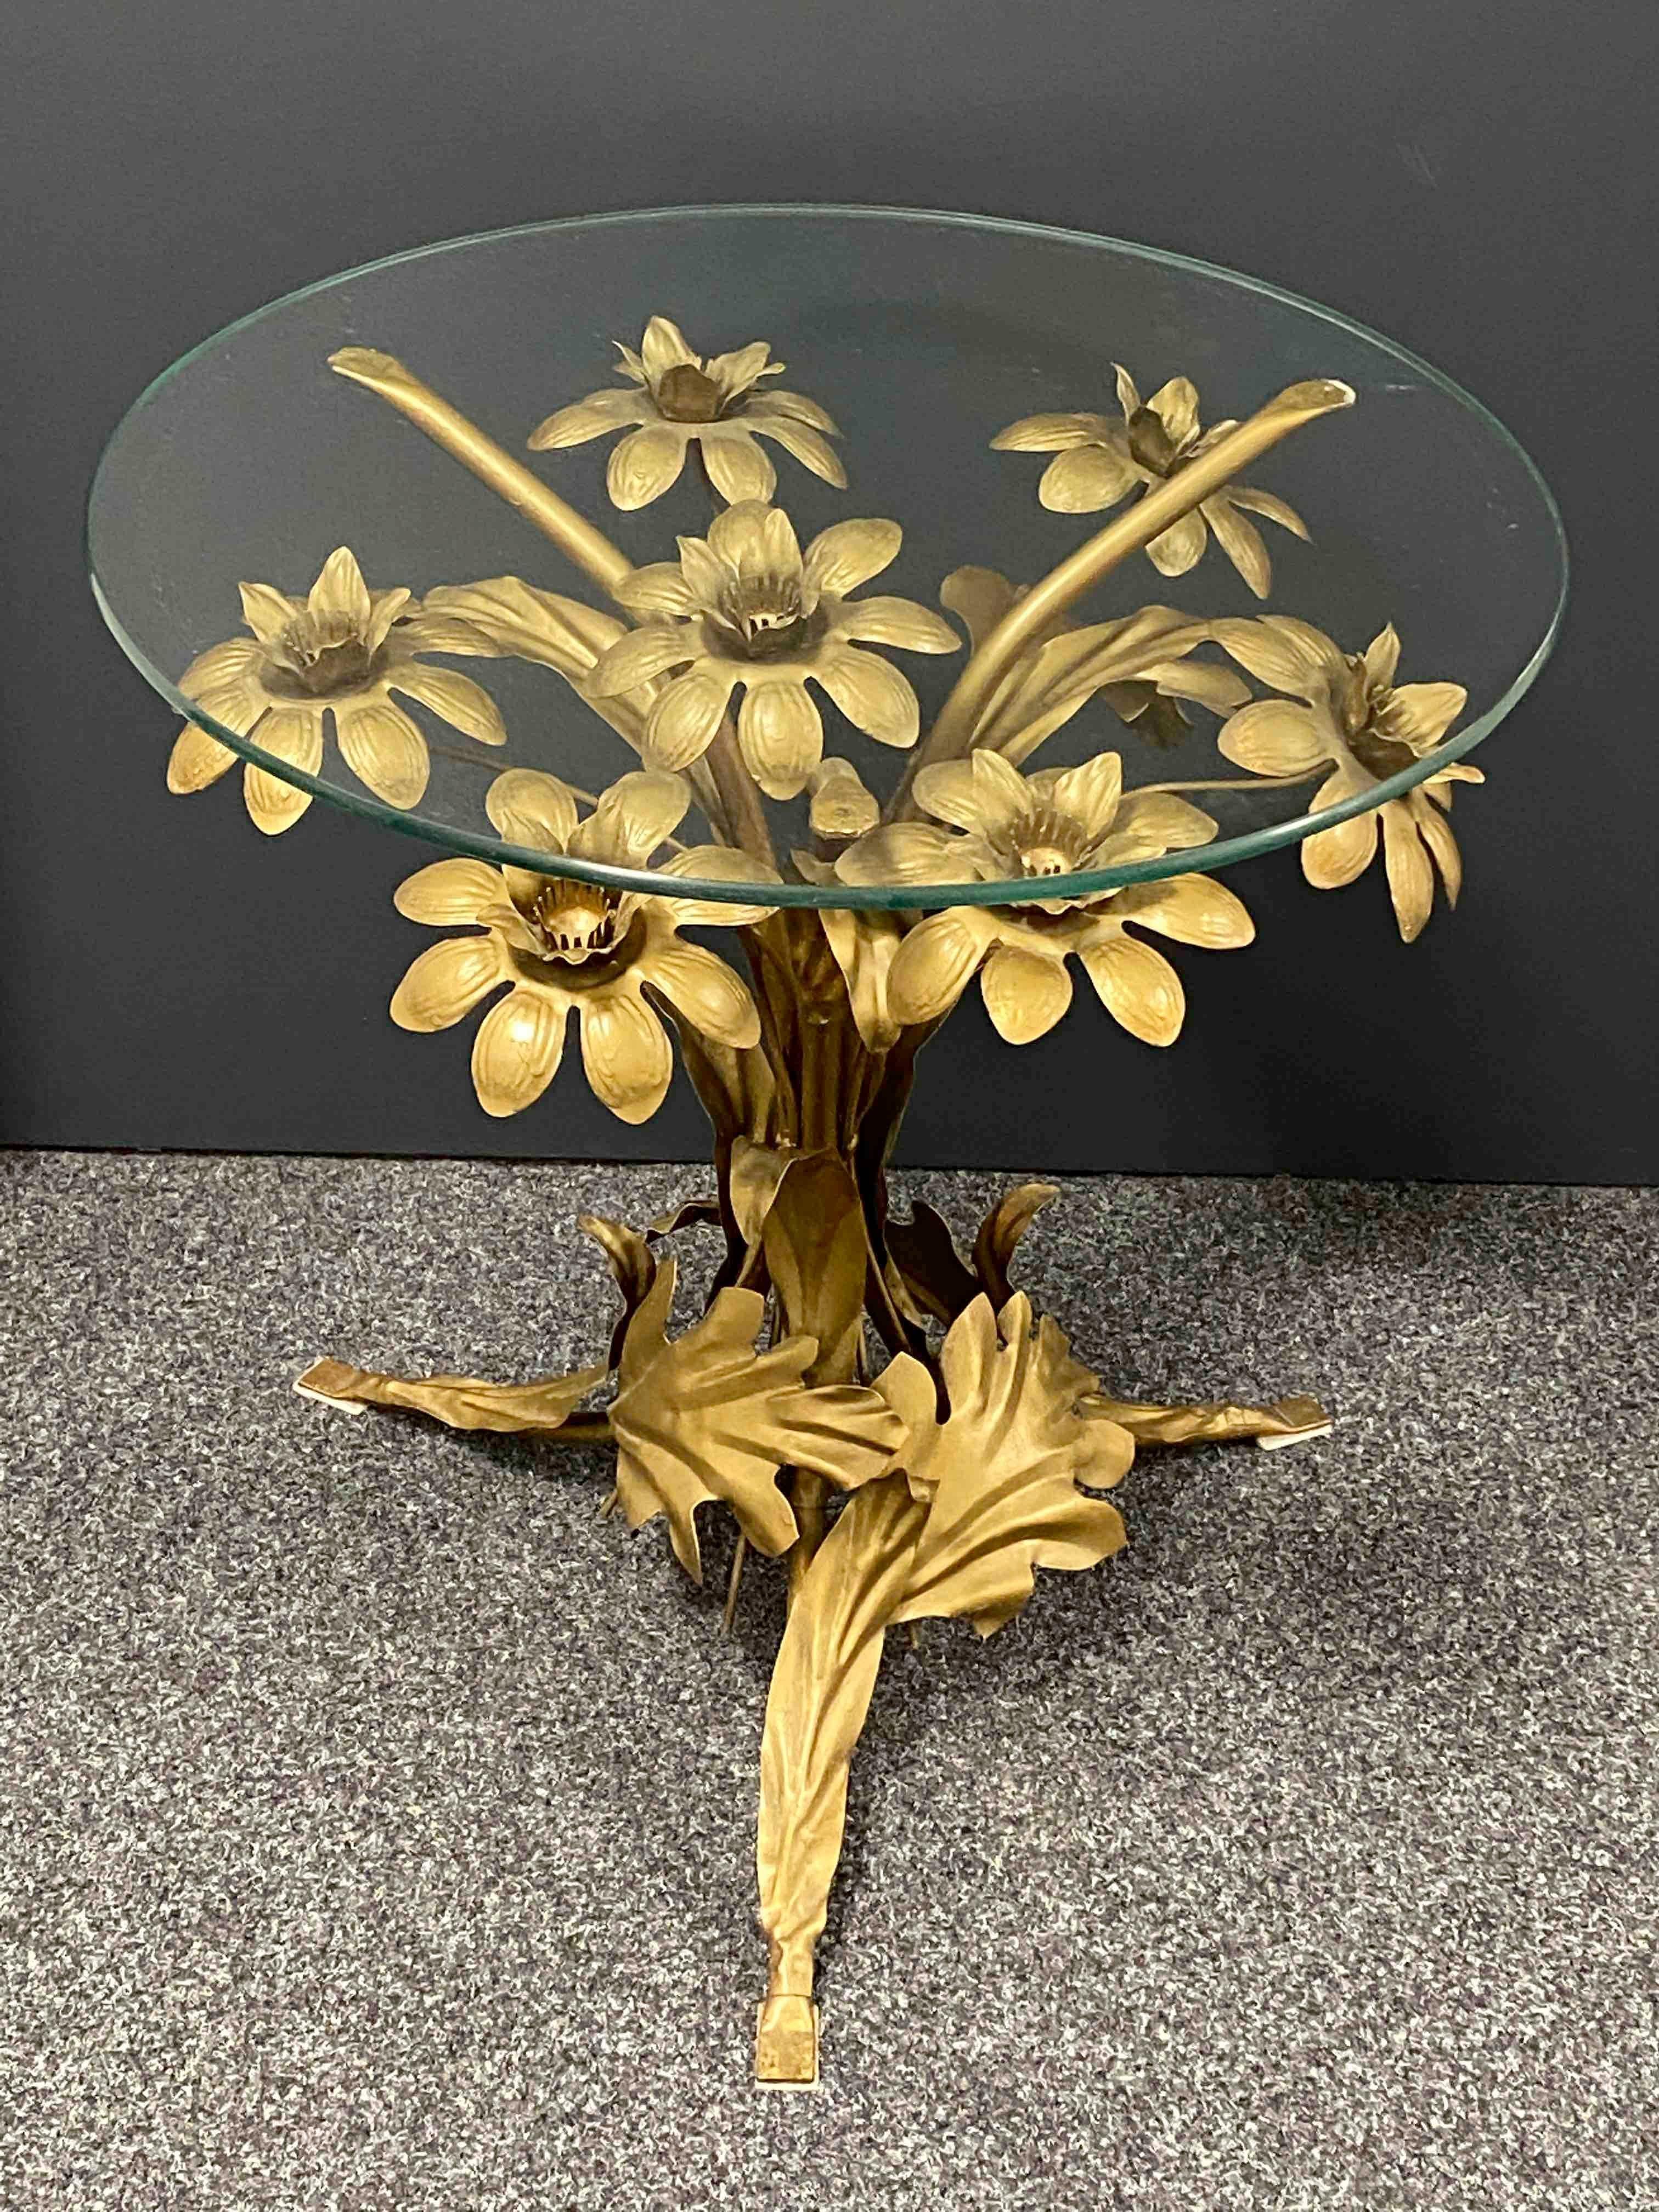 Offered is this beautiful Hollywood Regency gilded and silvered rose flower accent table base. Made in Italy. Glass plate is not included and only added for showing how it looks like with glass top. This is a good price for a item you can put your